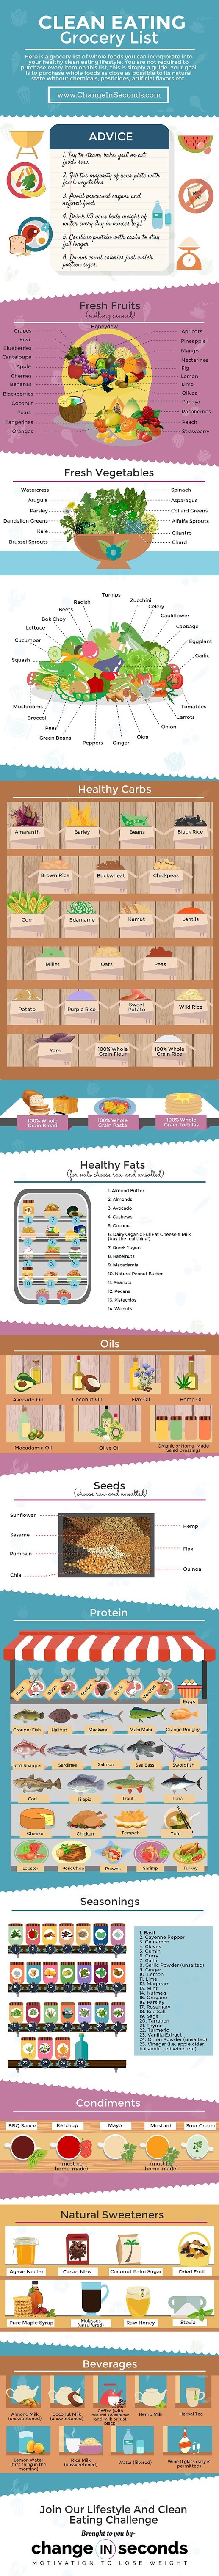 Infographic: Clean Eating Grocery List